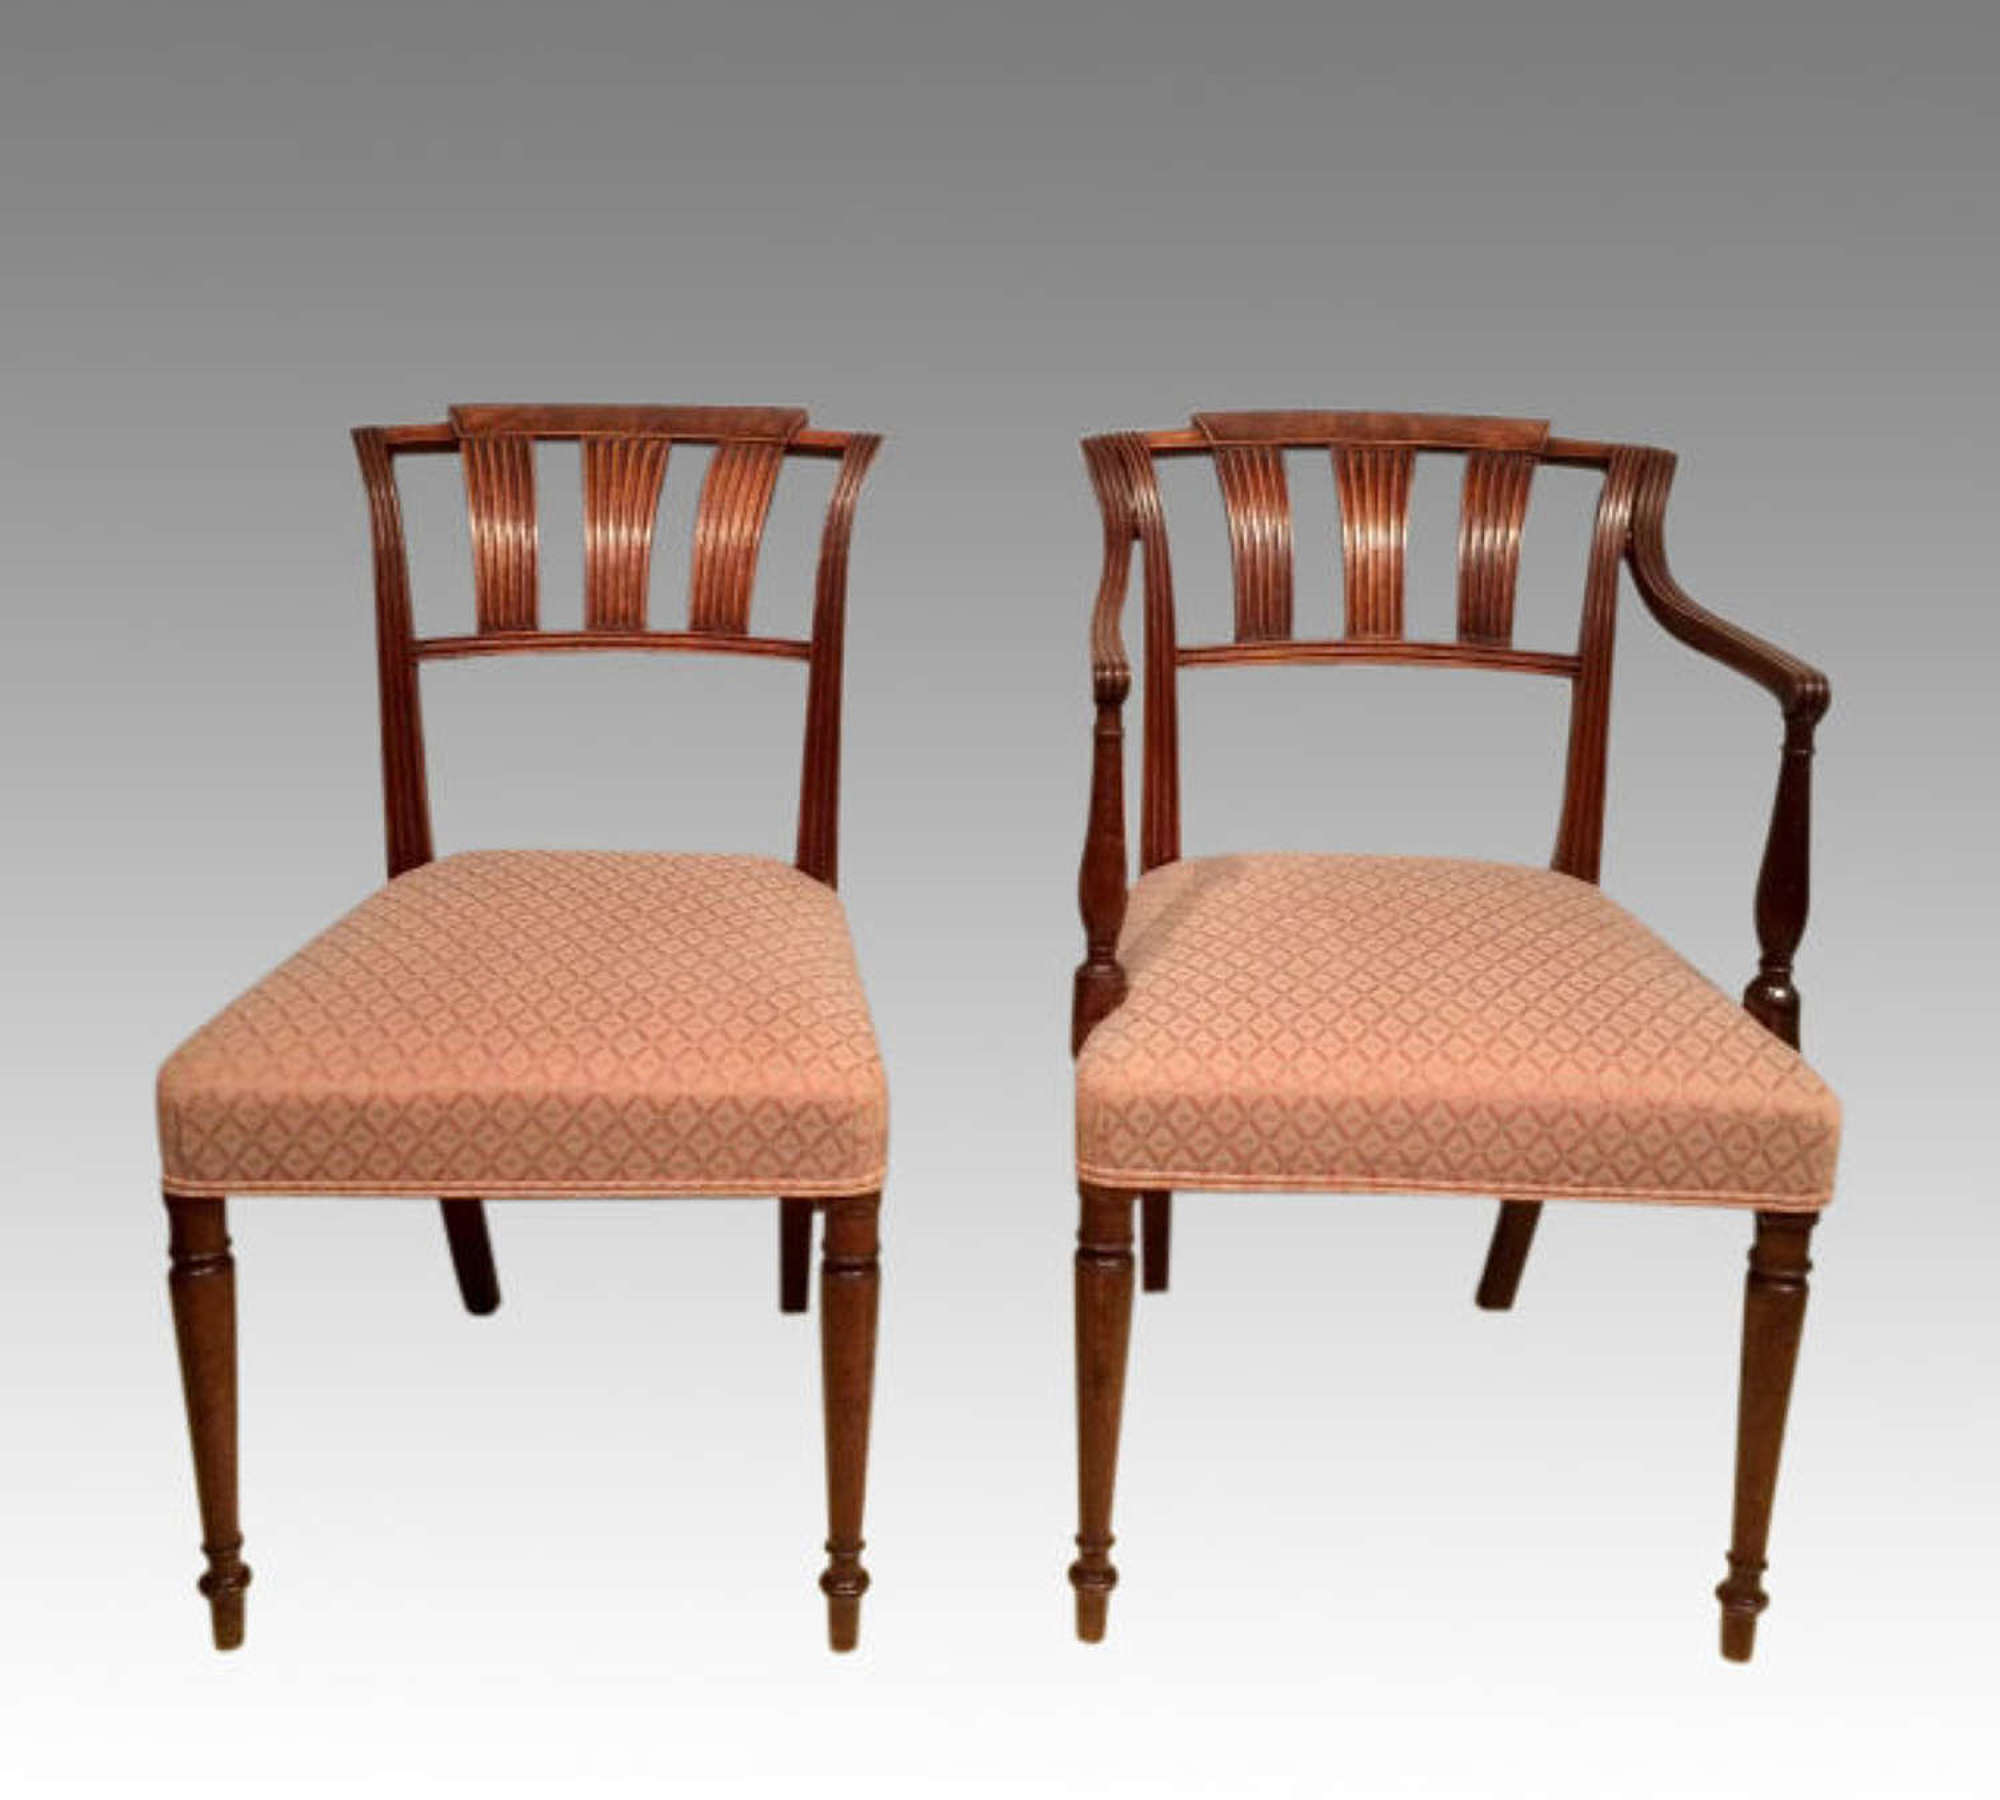 A set of 16 antique Georgian mahogany dining chairs.